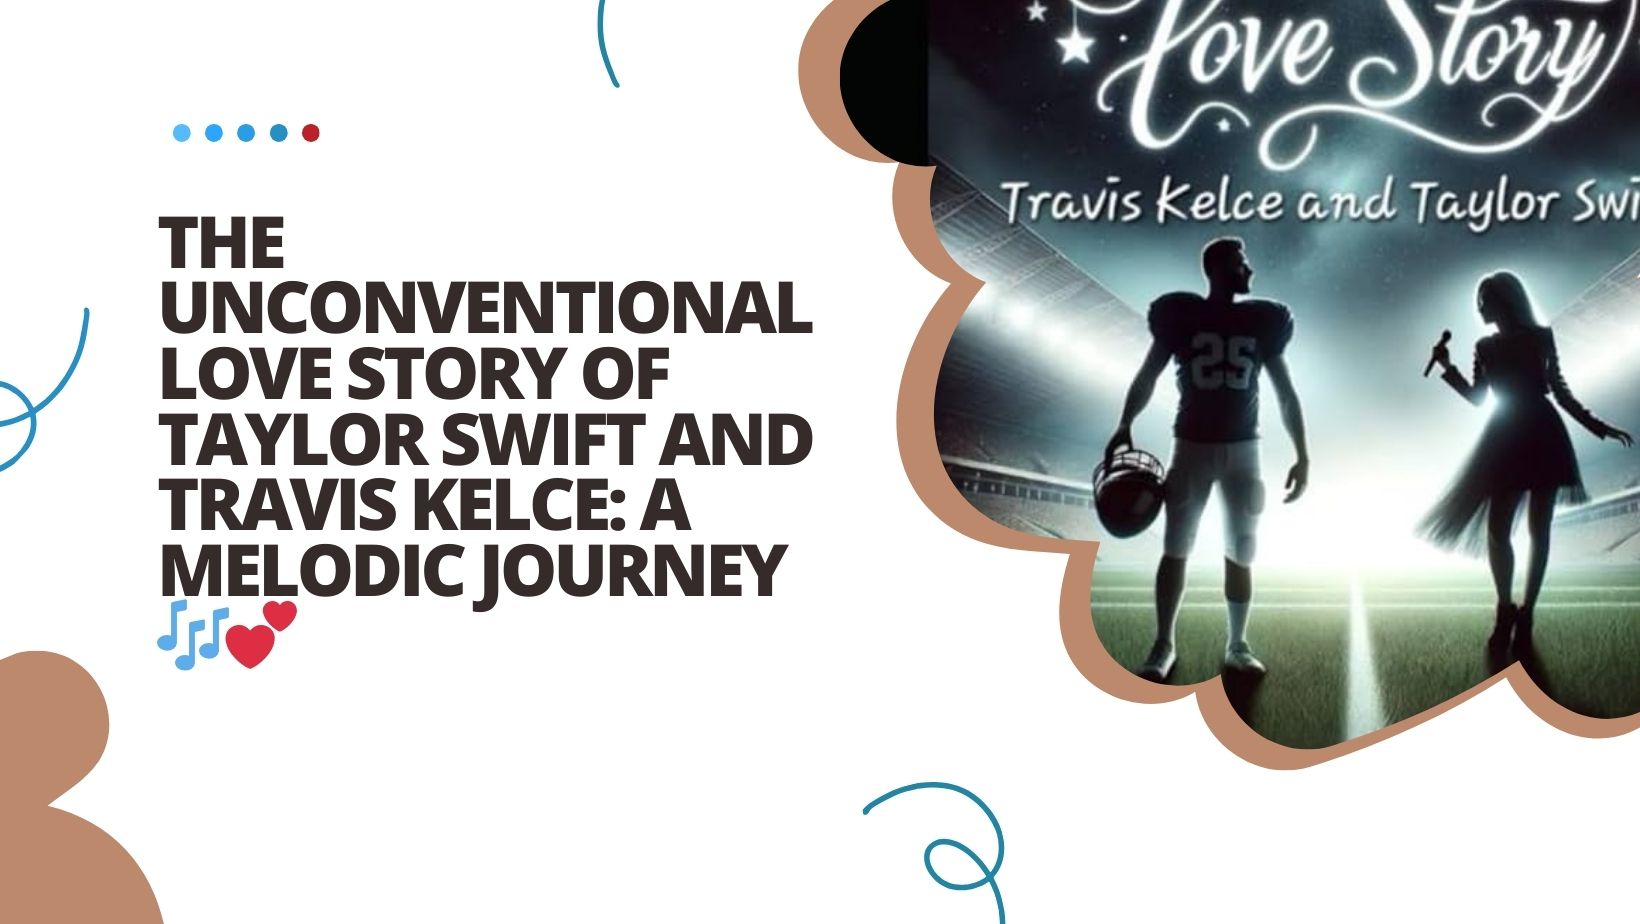 The Unconventional Love Story of Taylor Swift and Travis Kelce: A Melodic Journey 🎶💕